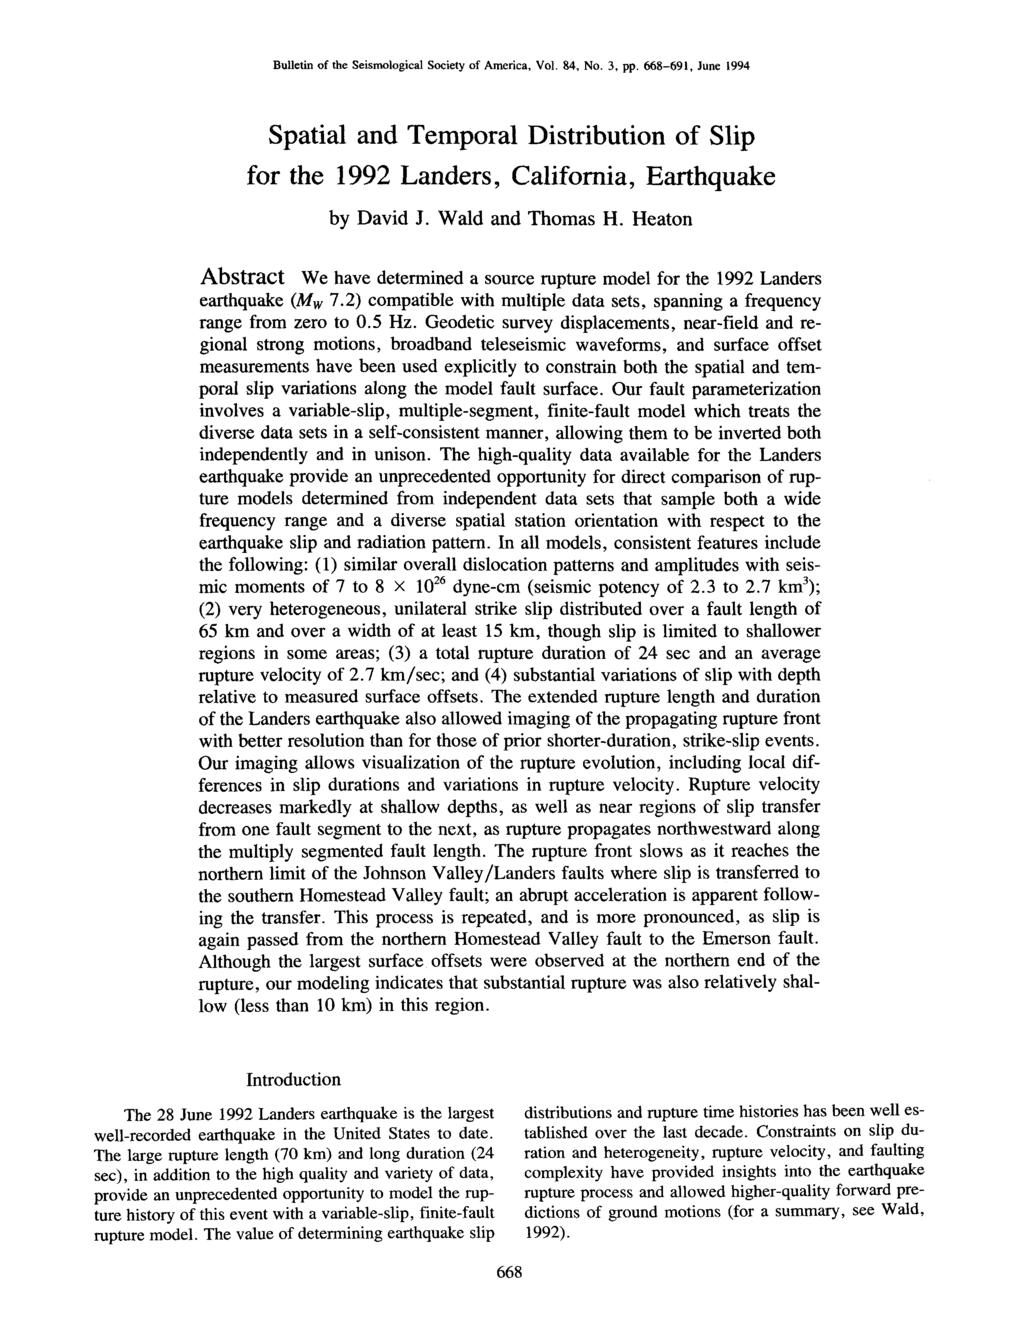 Bulletin of the Seismological Society of America, Vol. 84, No. 3, pp. 668-691, June 1994 Spatial and Temporal Distribution of Slip for the 1992 Landers, California, Earthquake by David J.